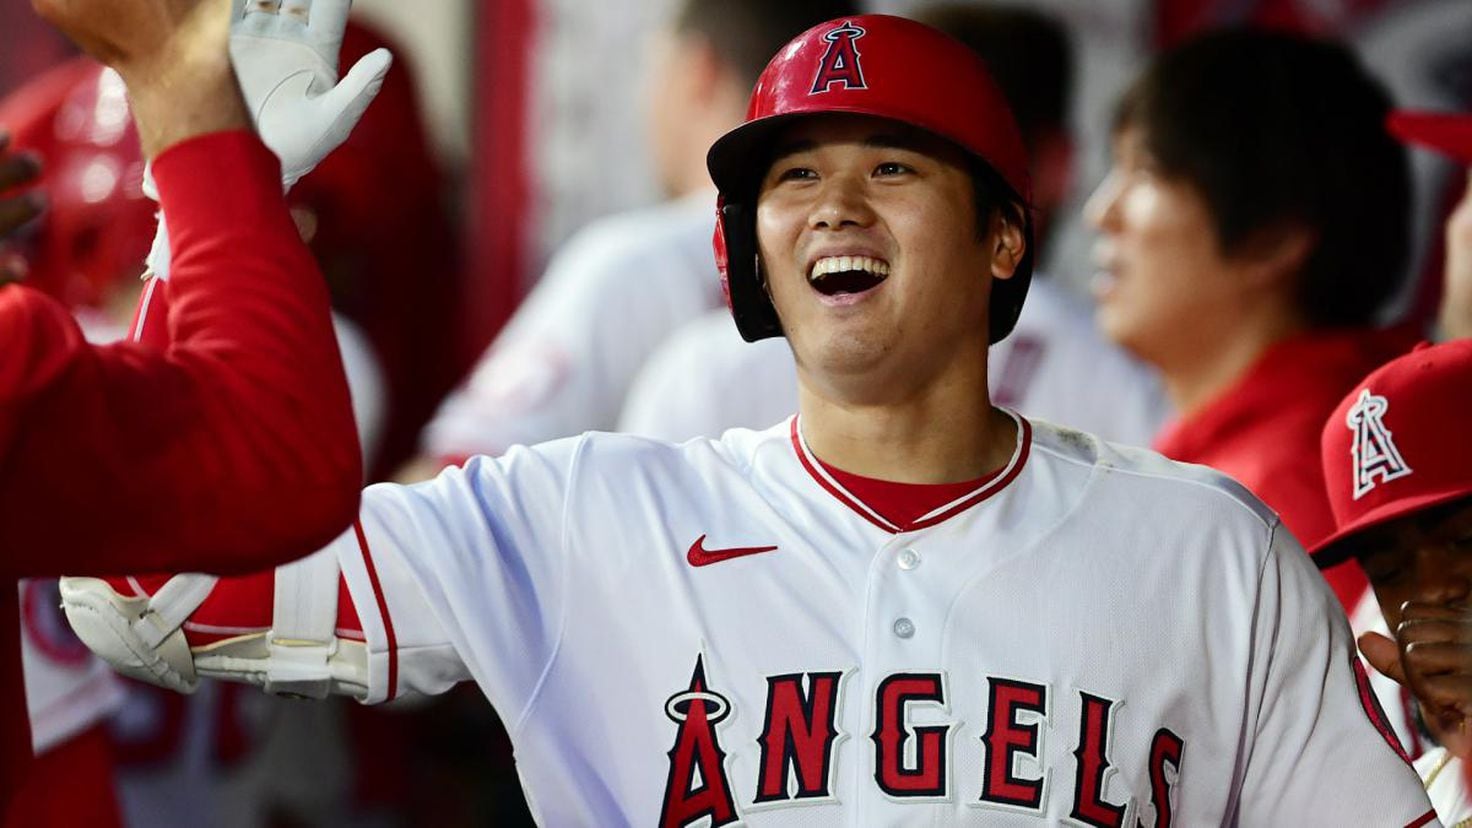 The 2021 All-Star Game is Shohei Ohtani's moment